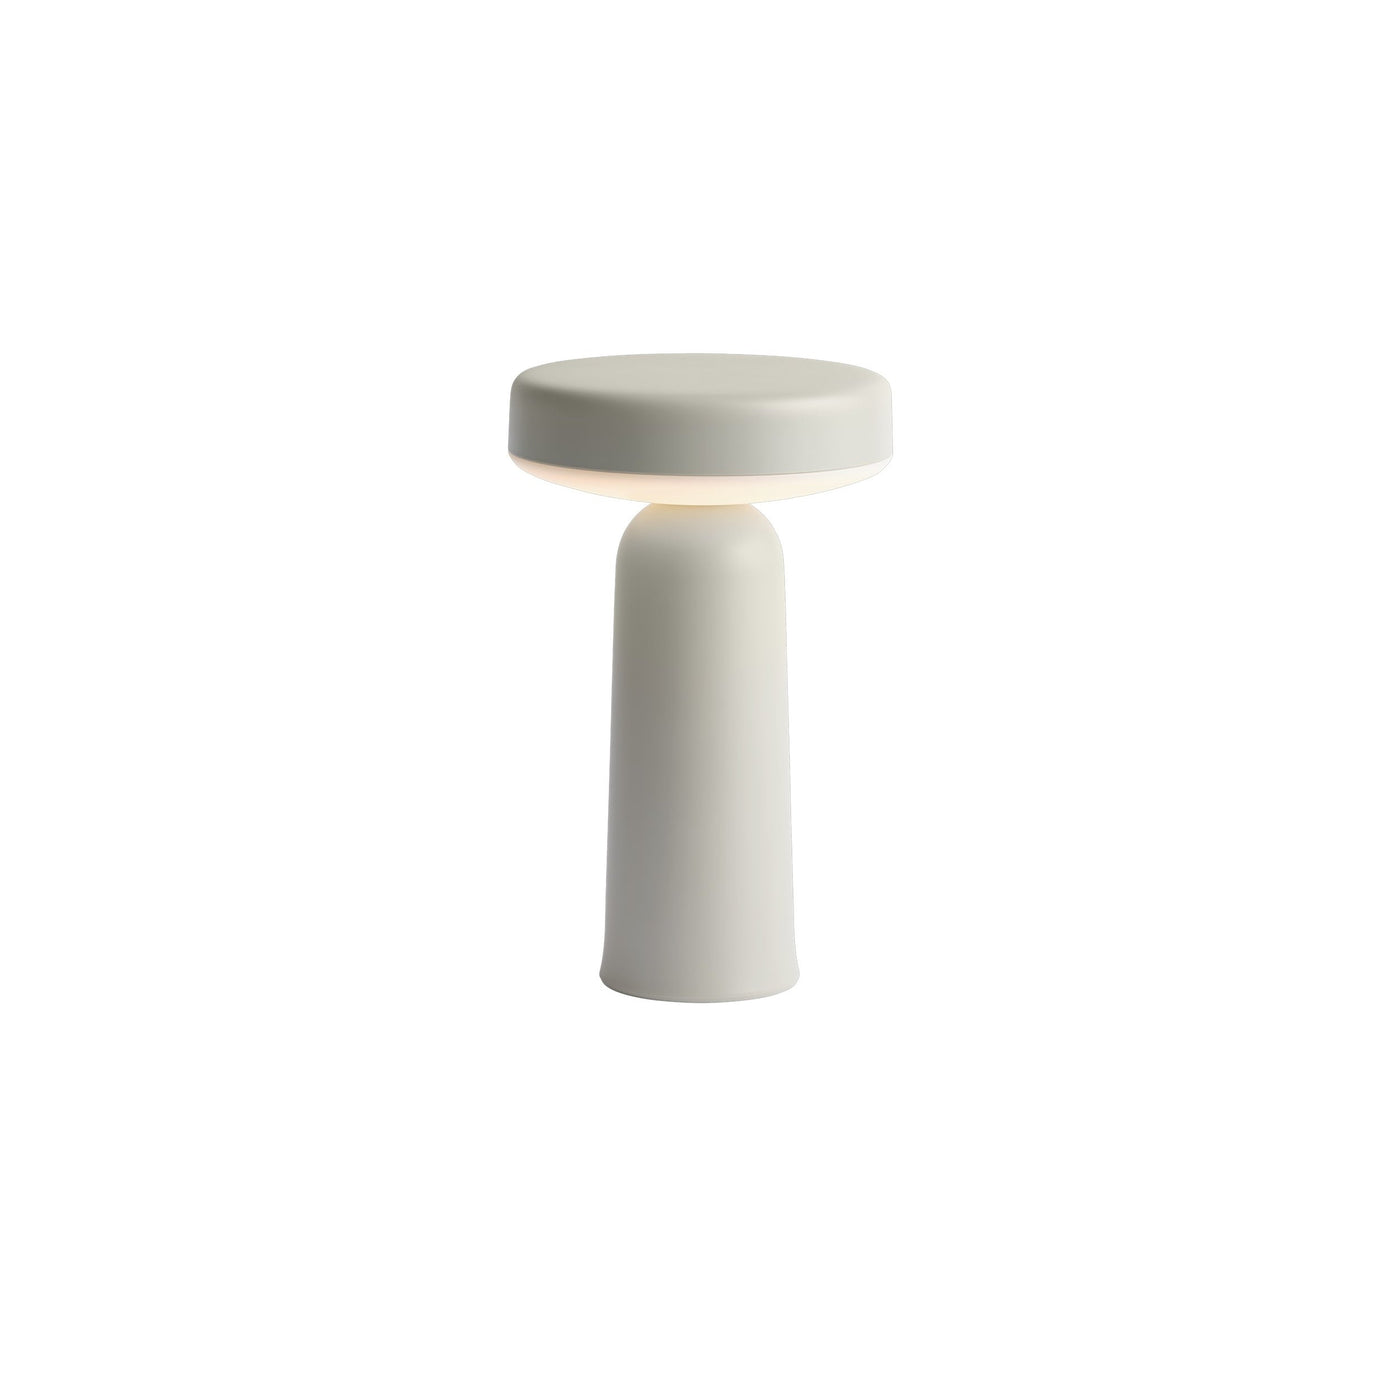 Muuto Ease Portable Lamp. Free UK delivery at someday designs. #colour_grey